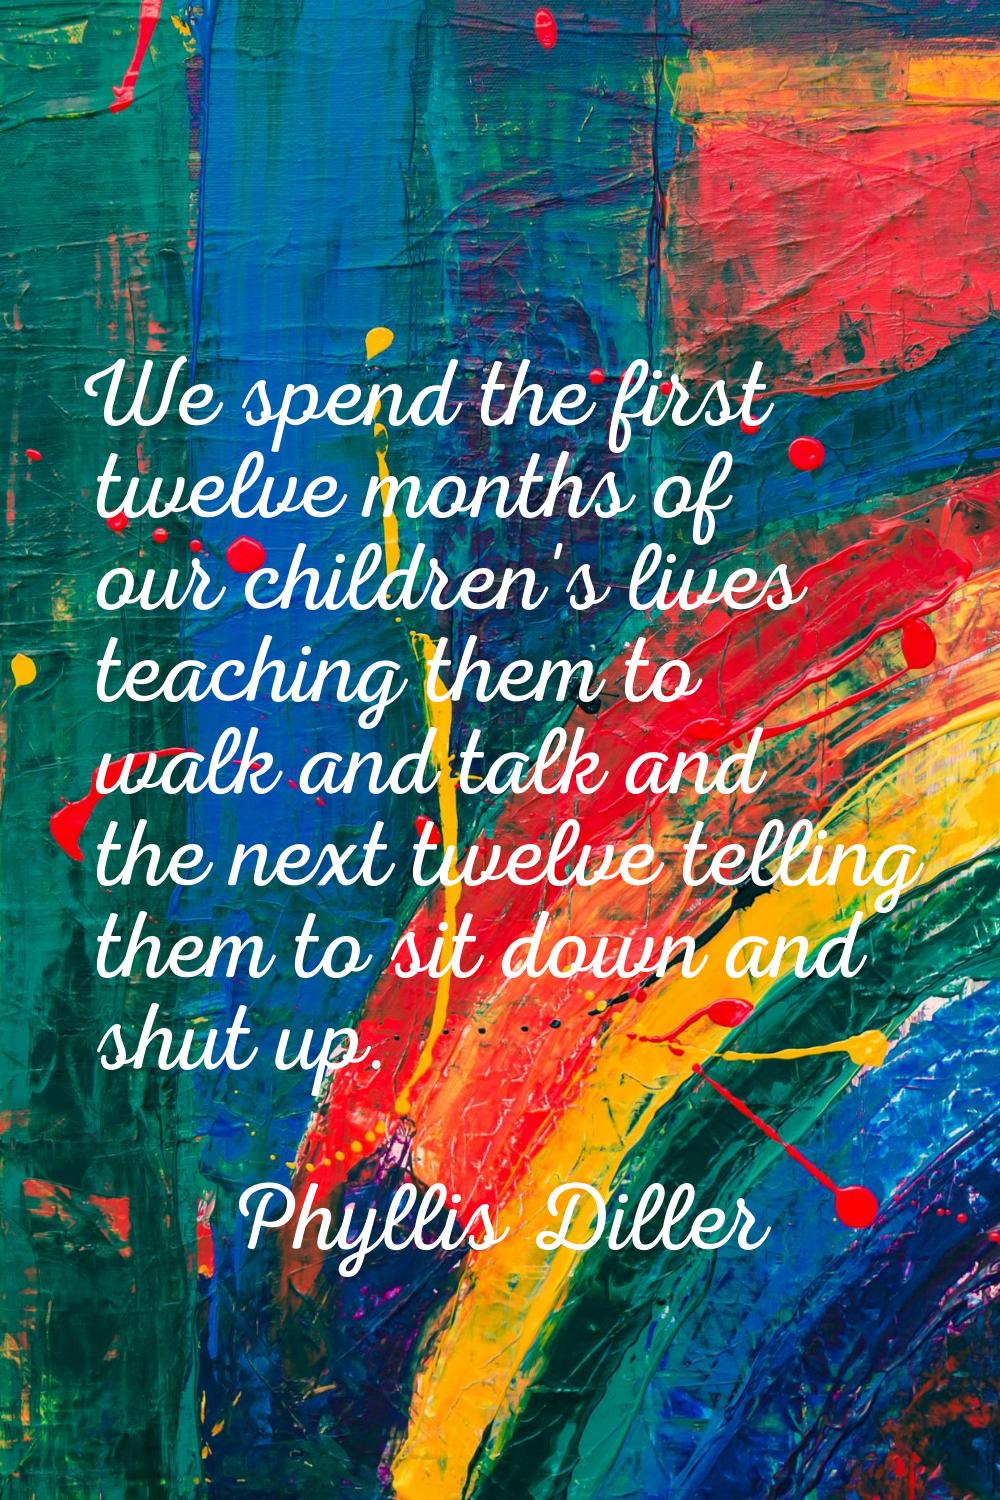 We spend the first twelve months of our children's lives teaching them to walk and talk and the nex